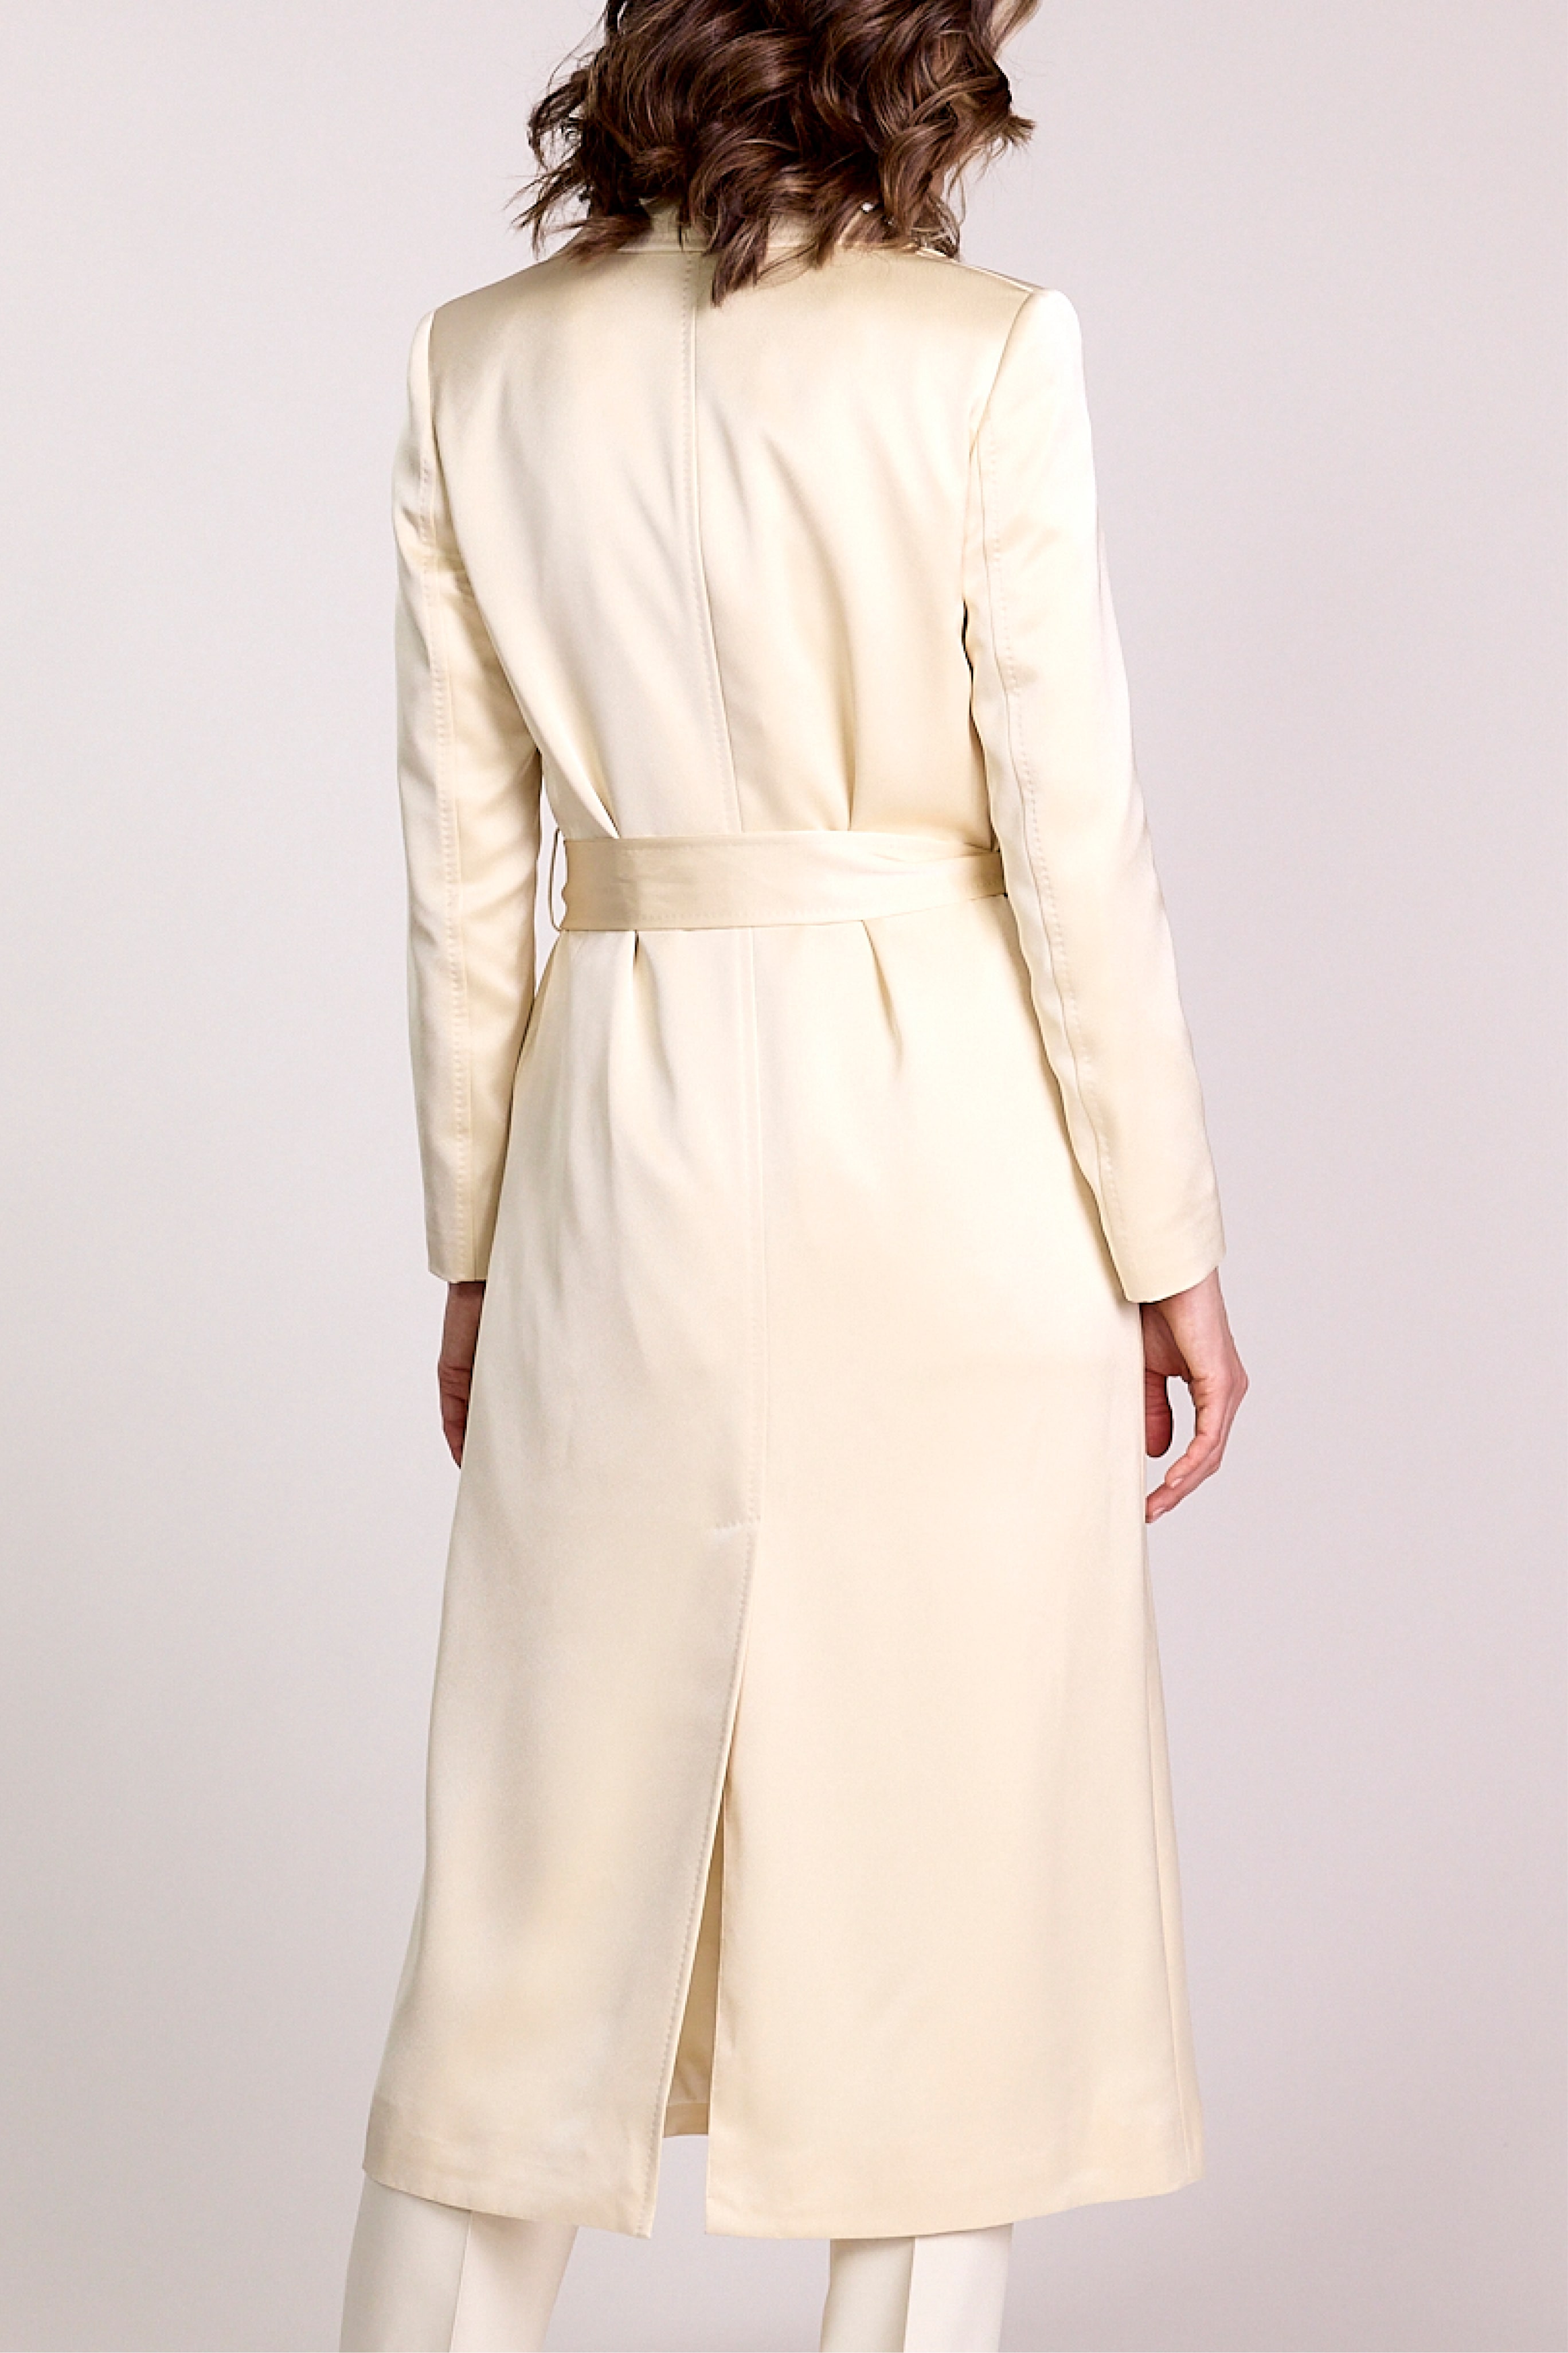 Knot Standard Ivory Duster by Knot Standard